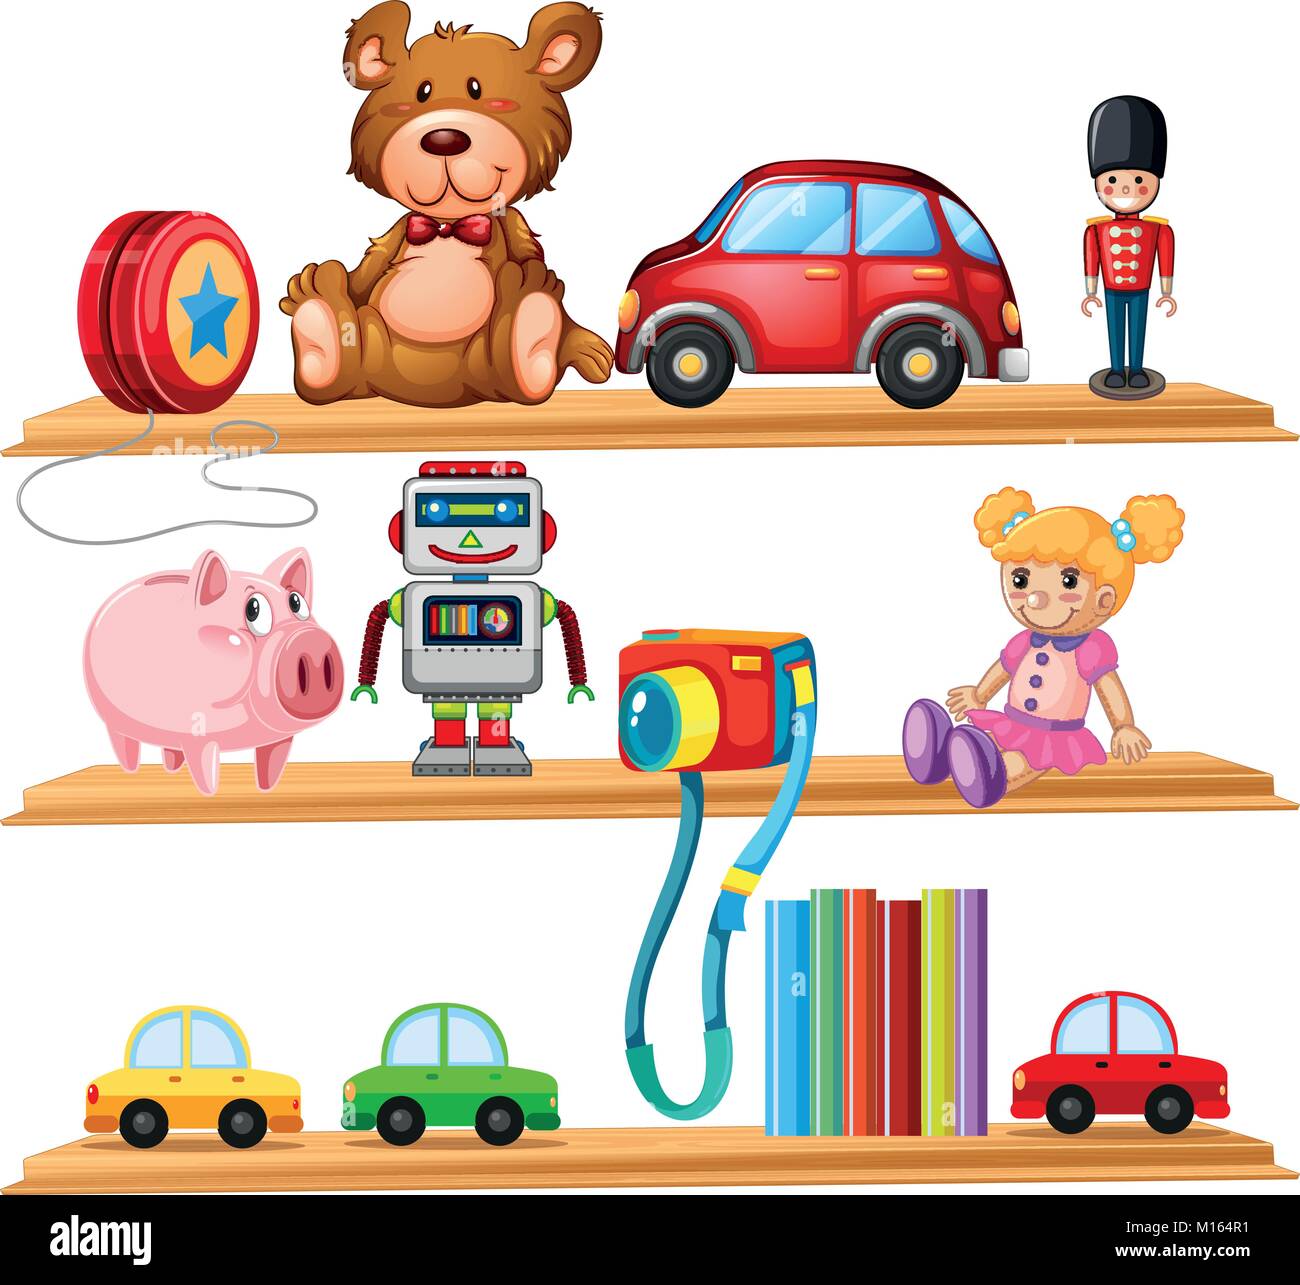 Many toys and books on wooden shelves illustration Stock Vector